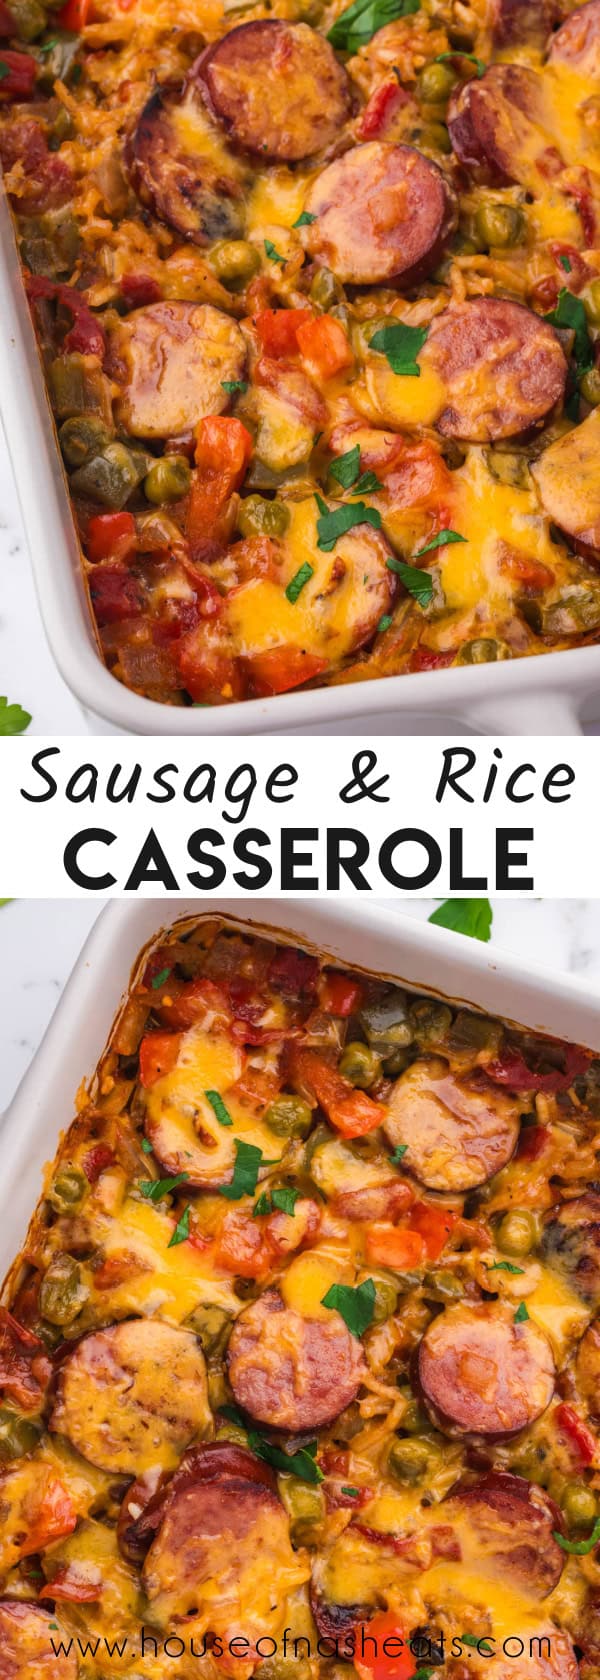 A collage of images of sausage & rice casserole with text overlay.